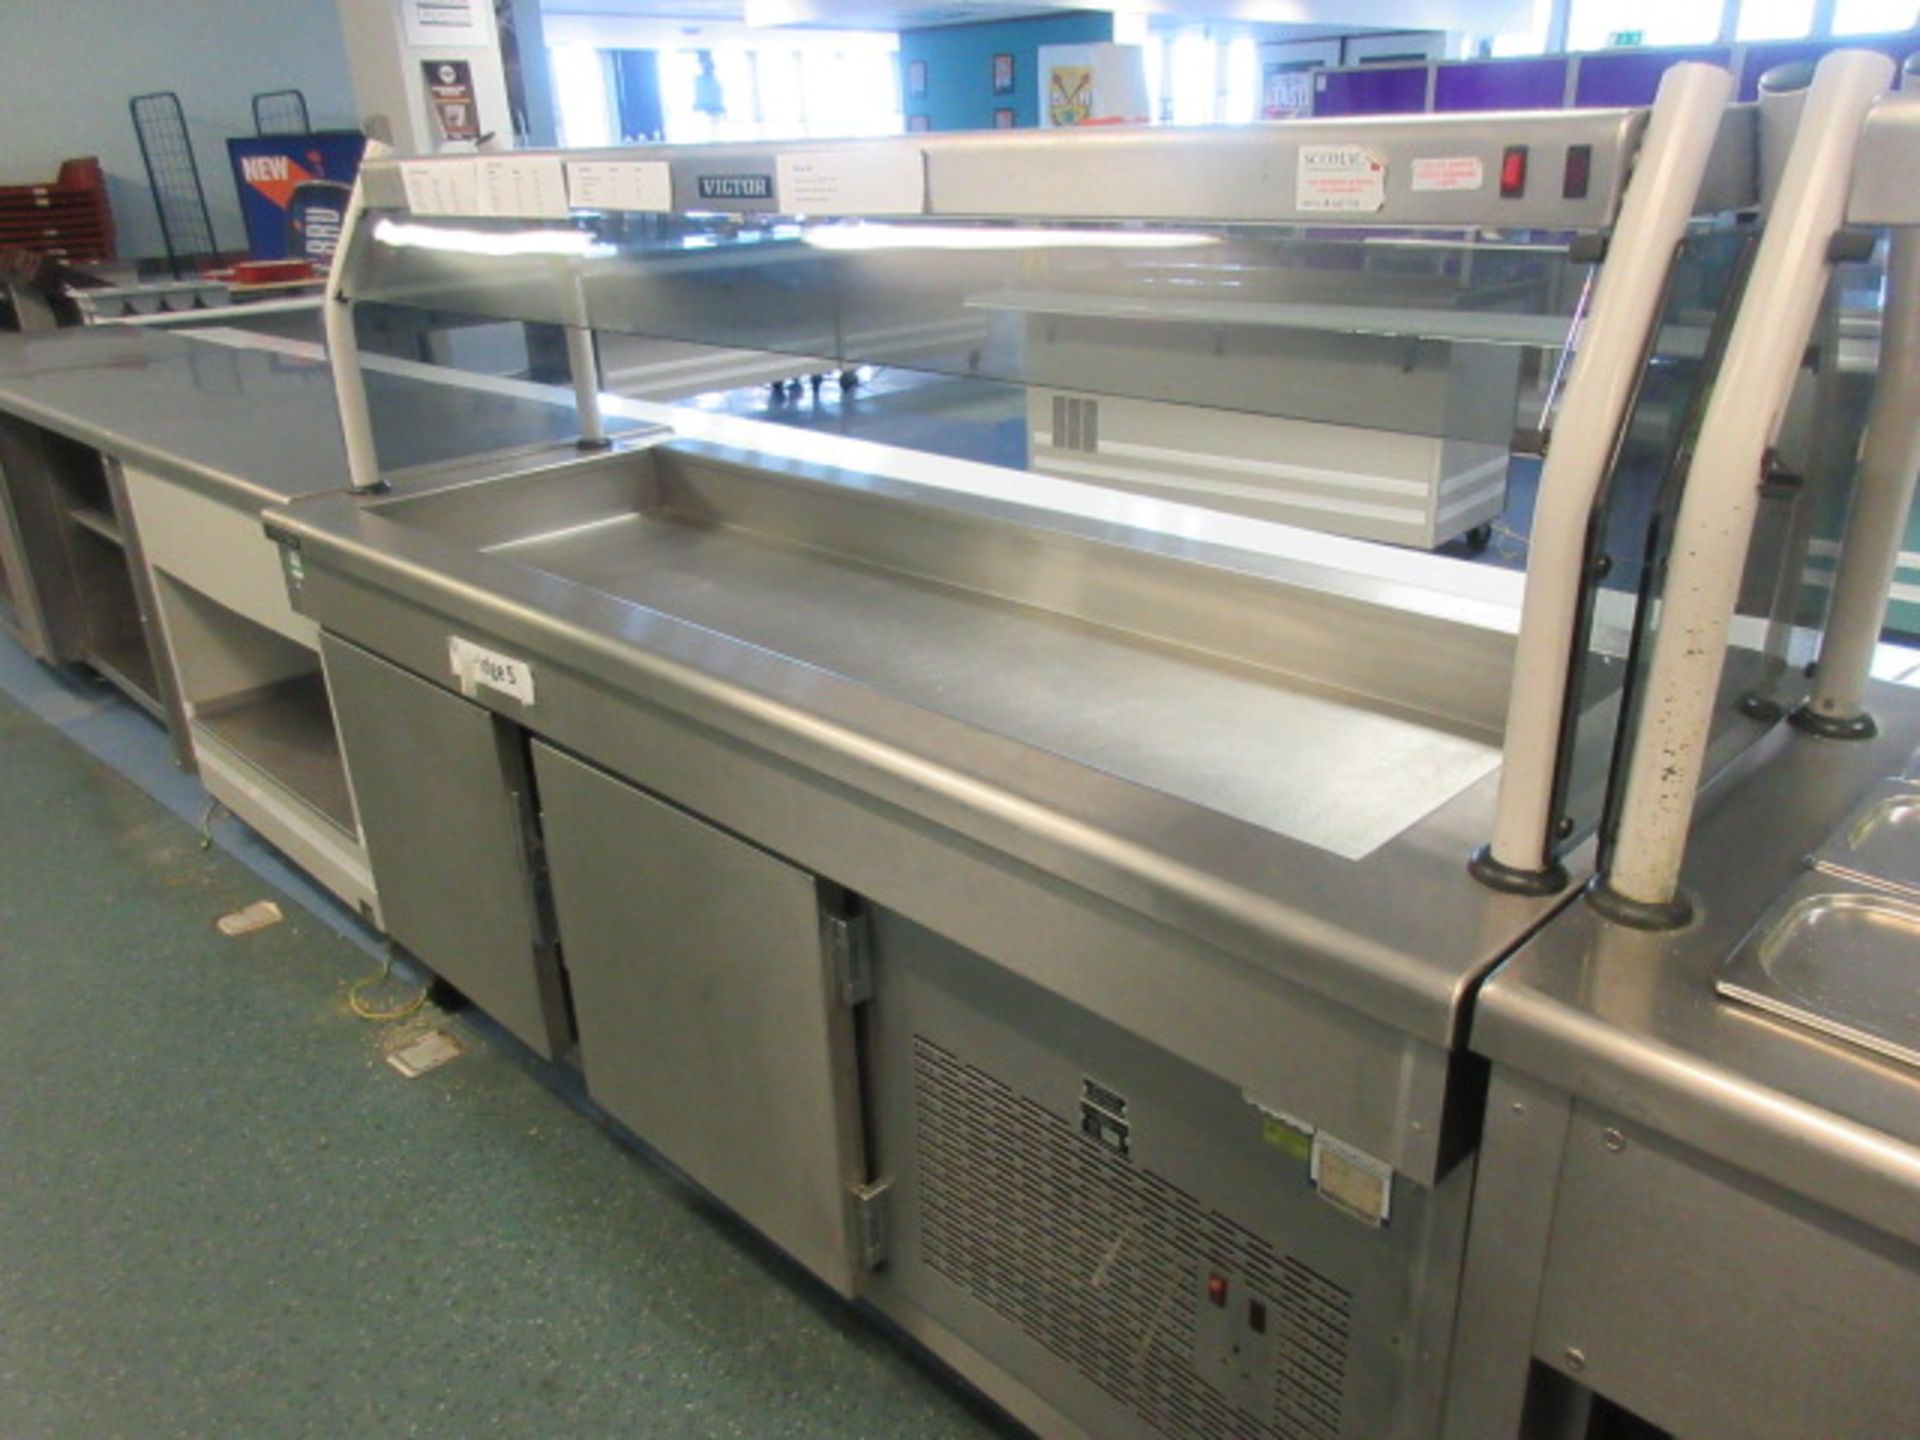 VICTOR 7 UNIT BAIN MARIE WITH TRAY SHELF. FOUR STORAGE UNITS, REFRIGERATED UNIT, HEATED 7 POT - Image 5 of 6